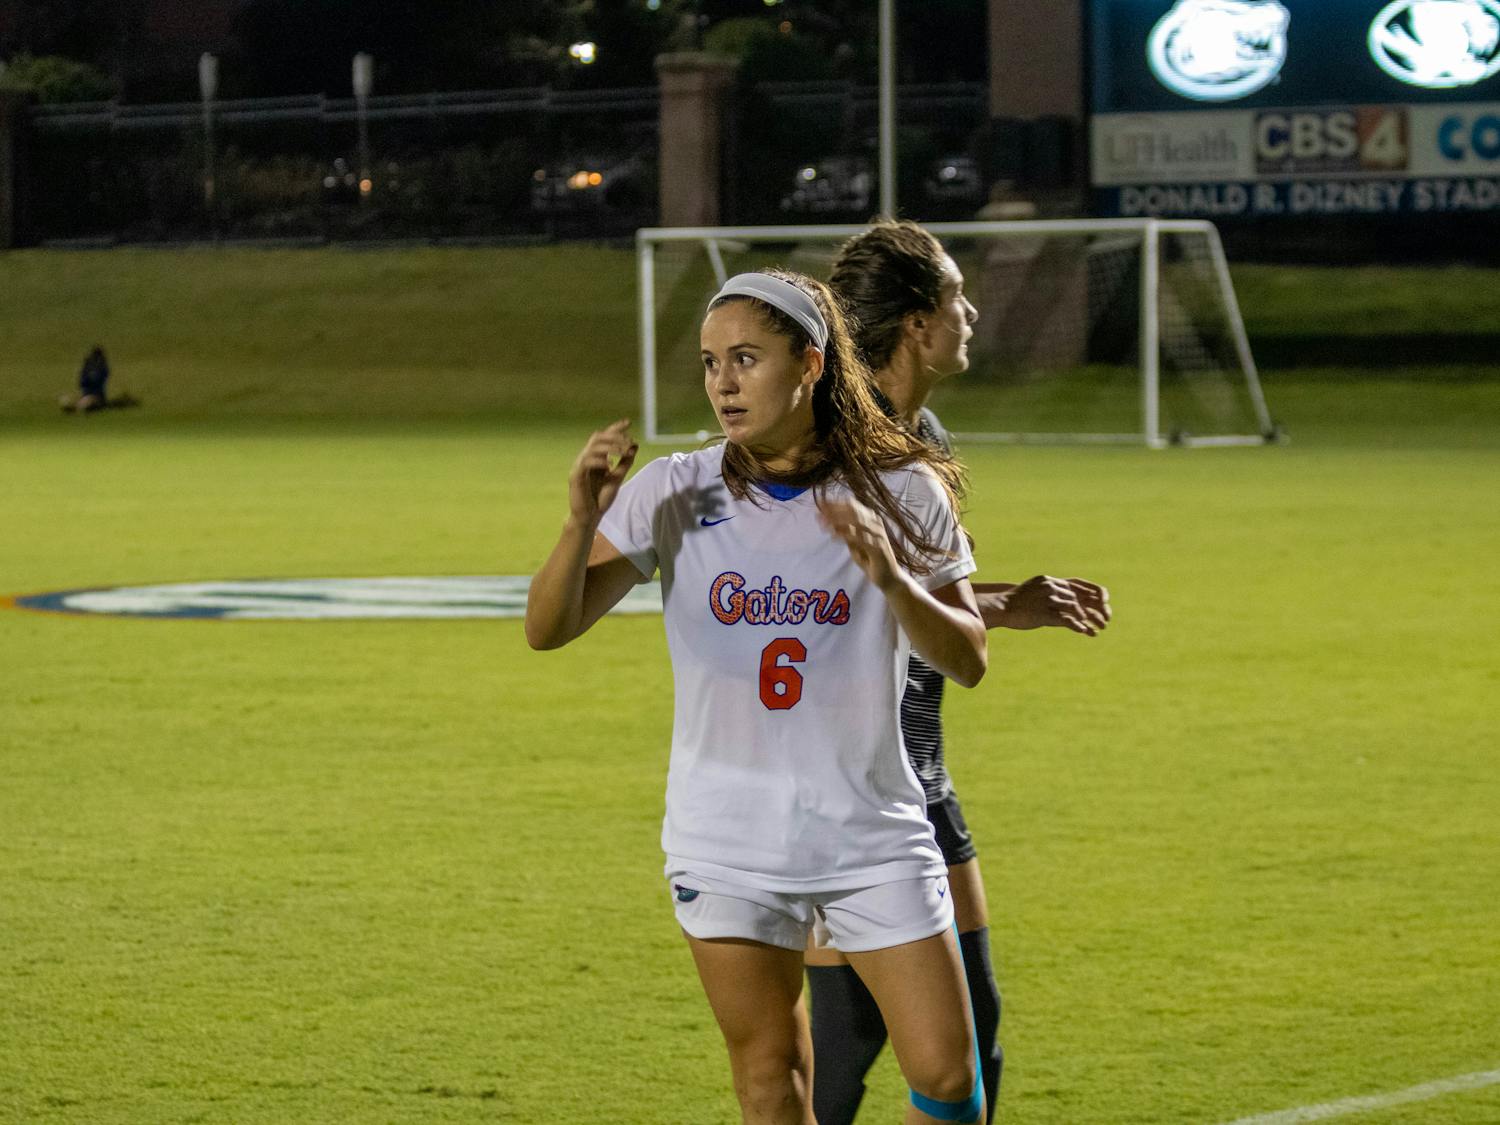 Defender Kit Loferski (6) drew a penalty kick in the seventh minute of Florida’s 3-1 win over Texas A&amp;M Sunday night. Midfielder Madison Alexander buried the shot to get the Gators on the board first.